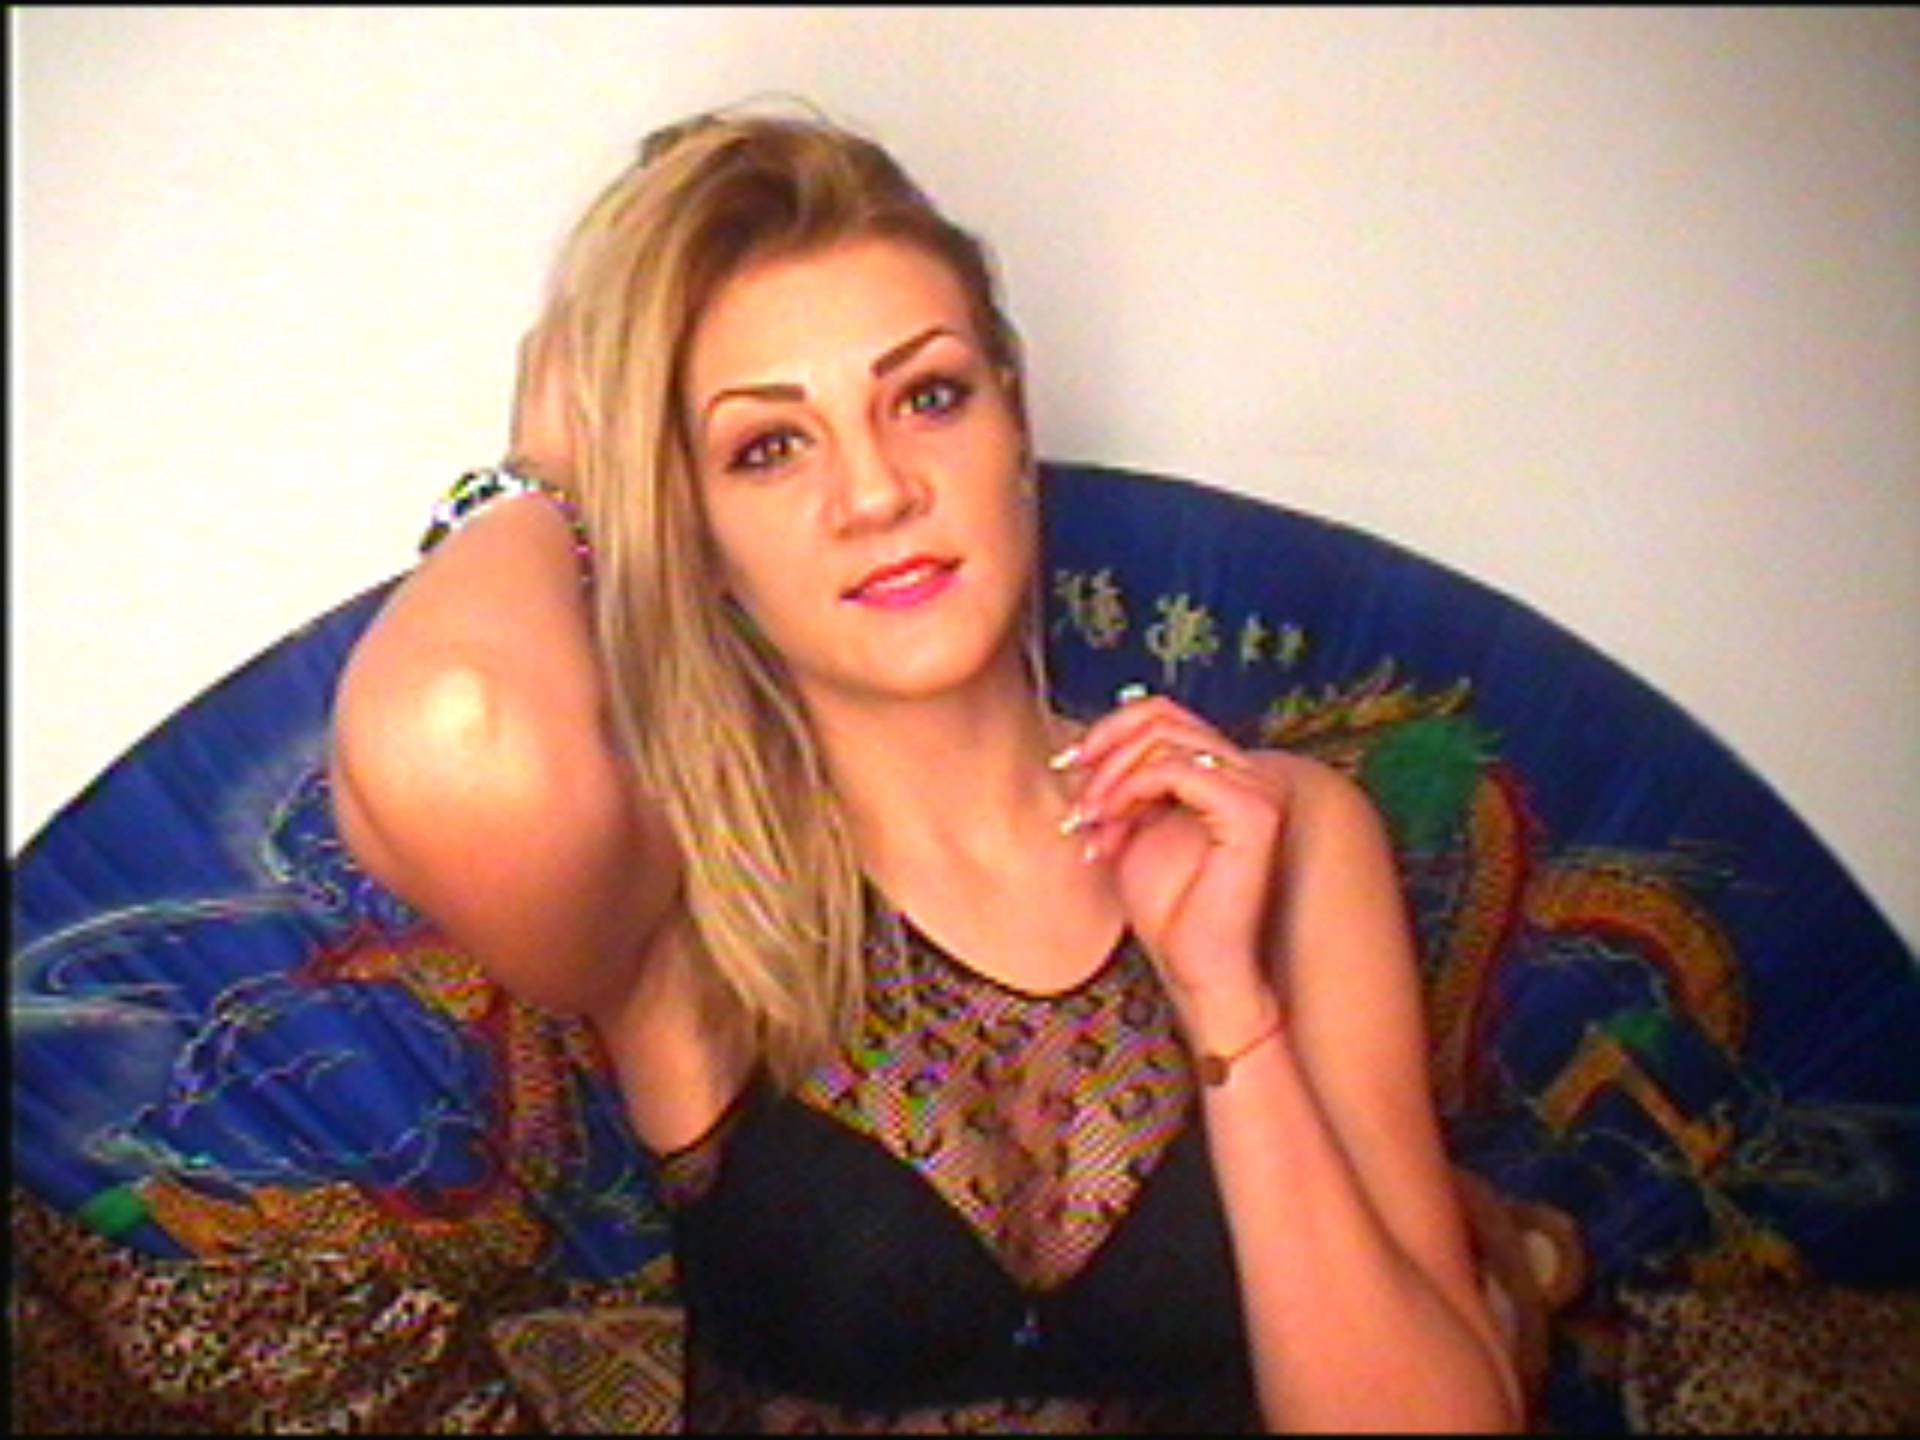 Image of cam model SarahFontain from XloveCam